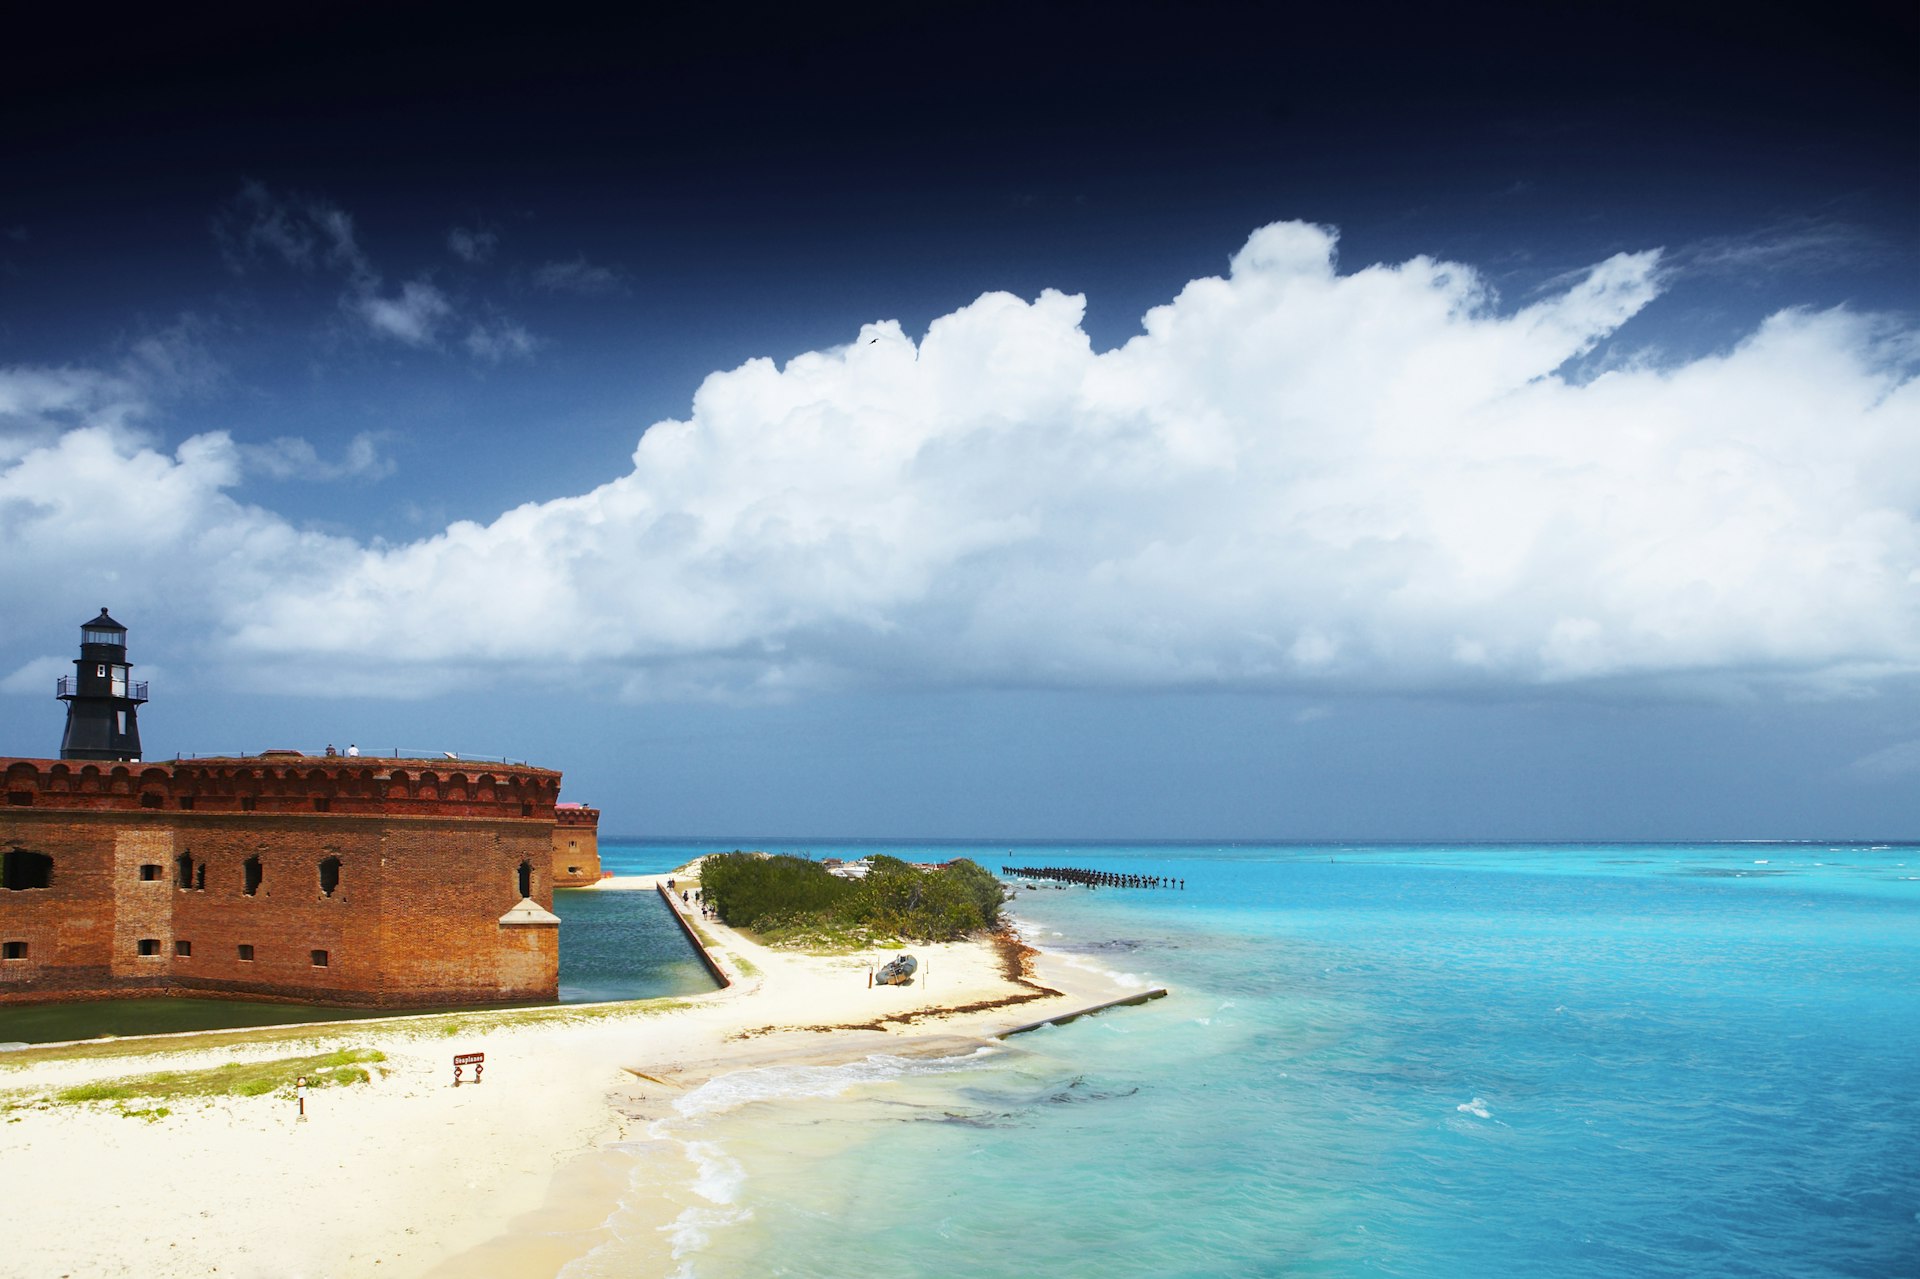 An old fort on a tropical beach, with blue skies and waters